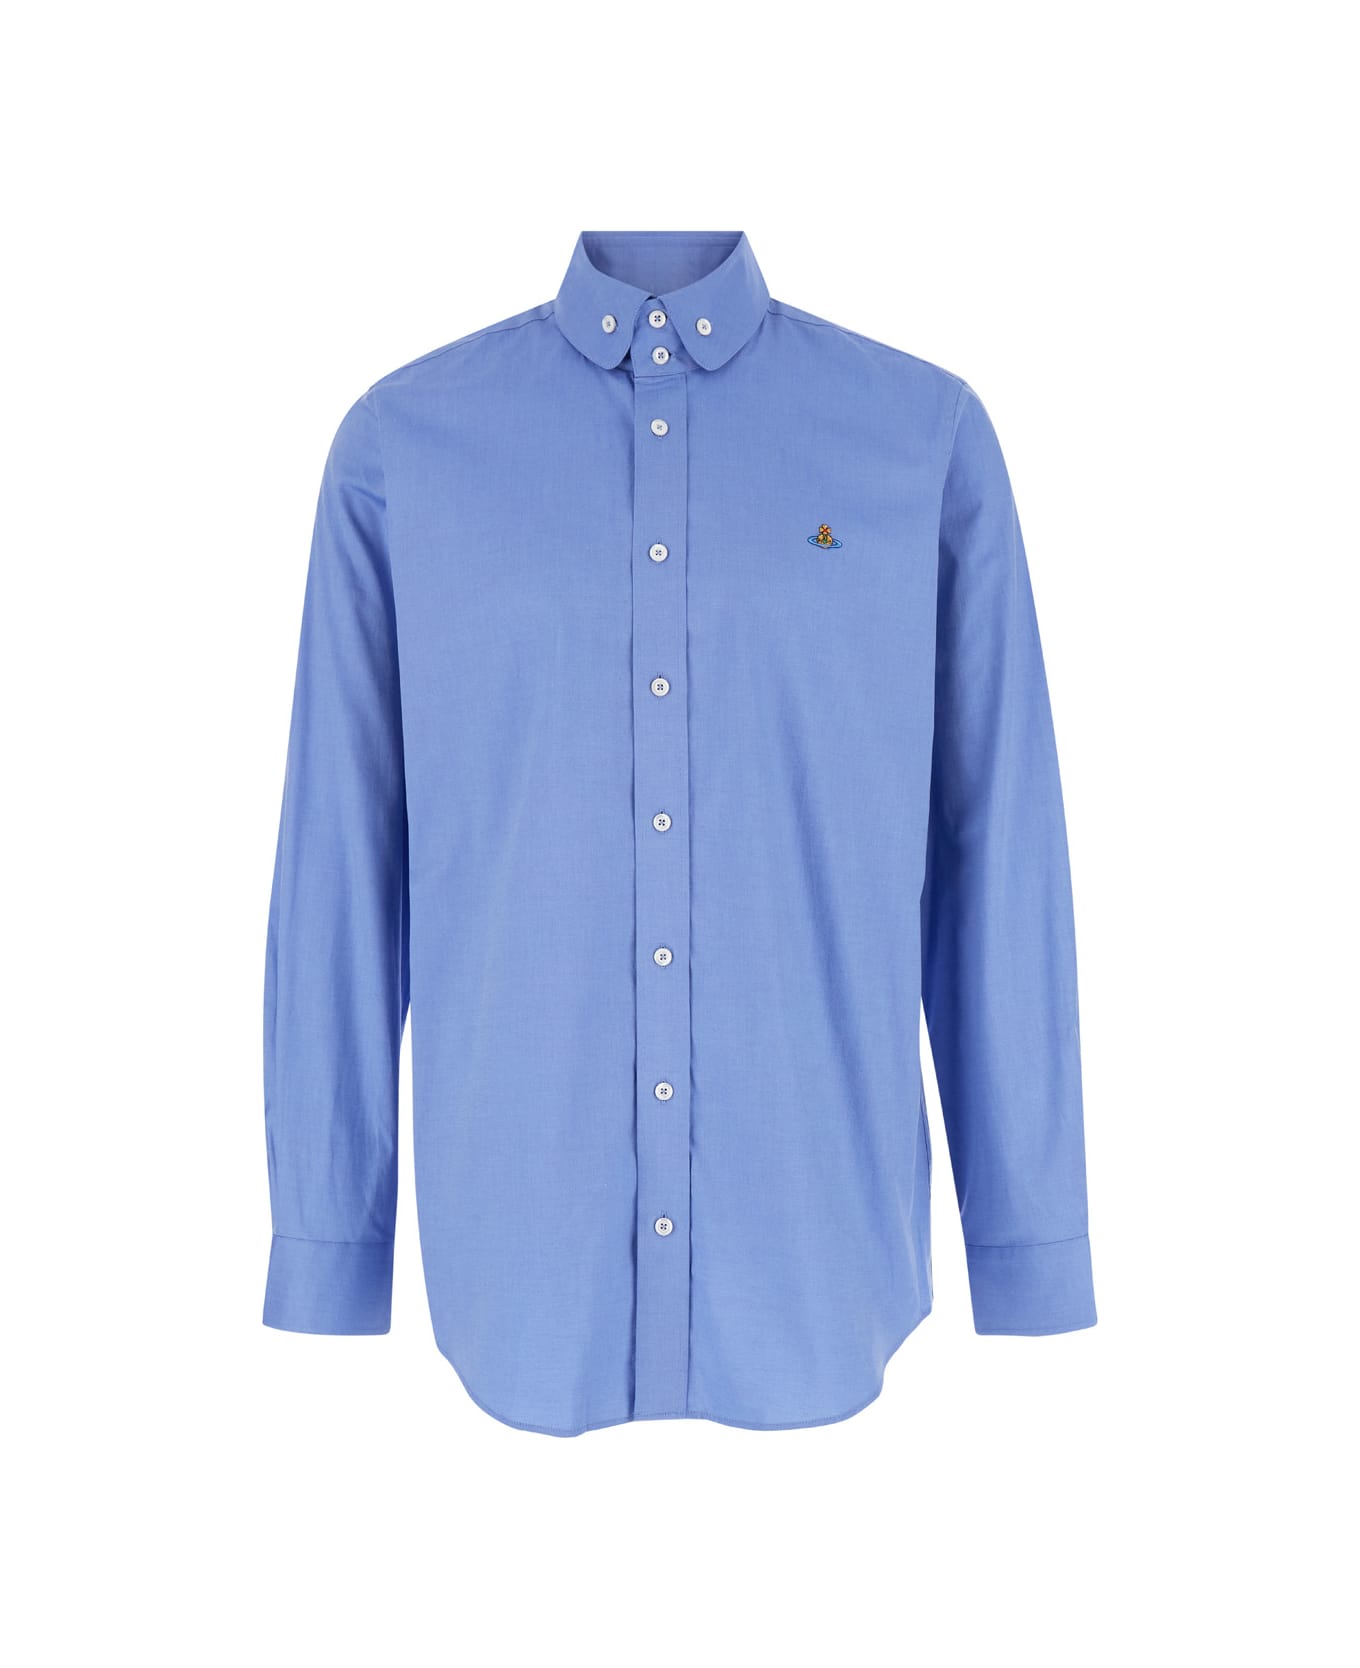 Vivienne Westwood Light Blue Shirt With Buttons In Cotton Man - Blu シャツ